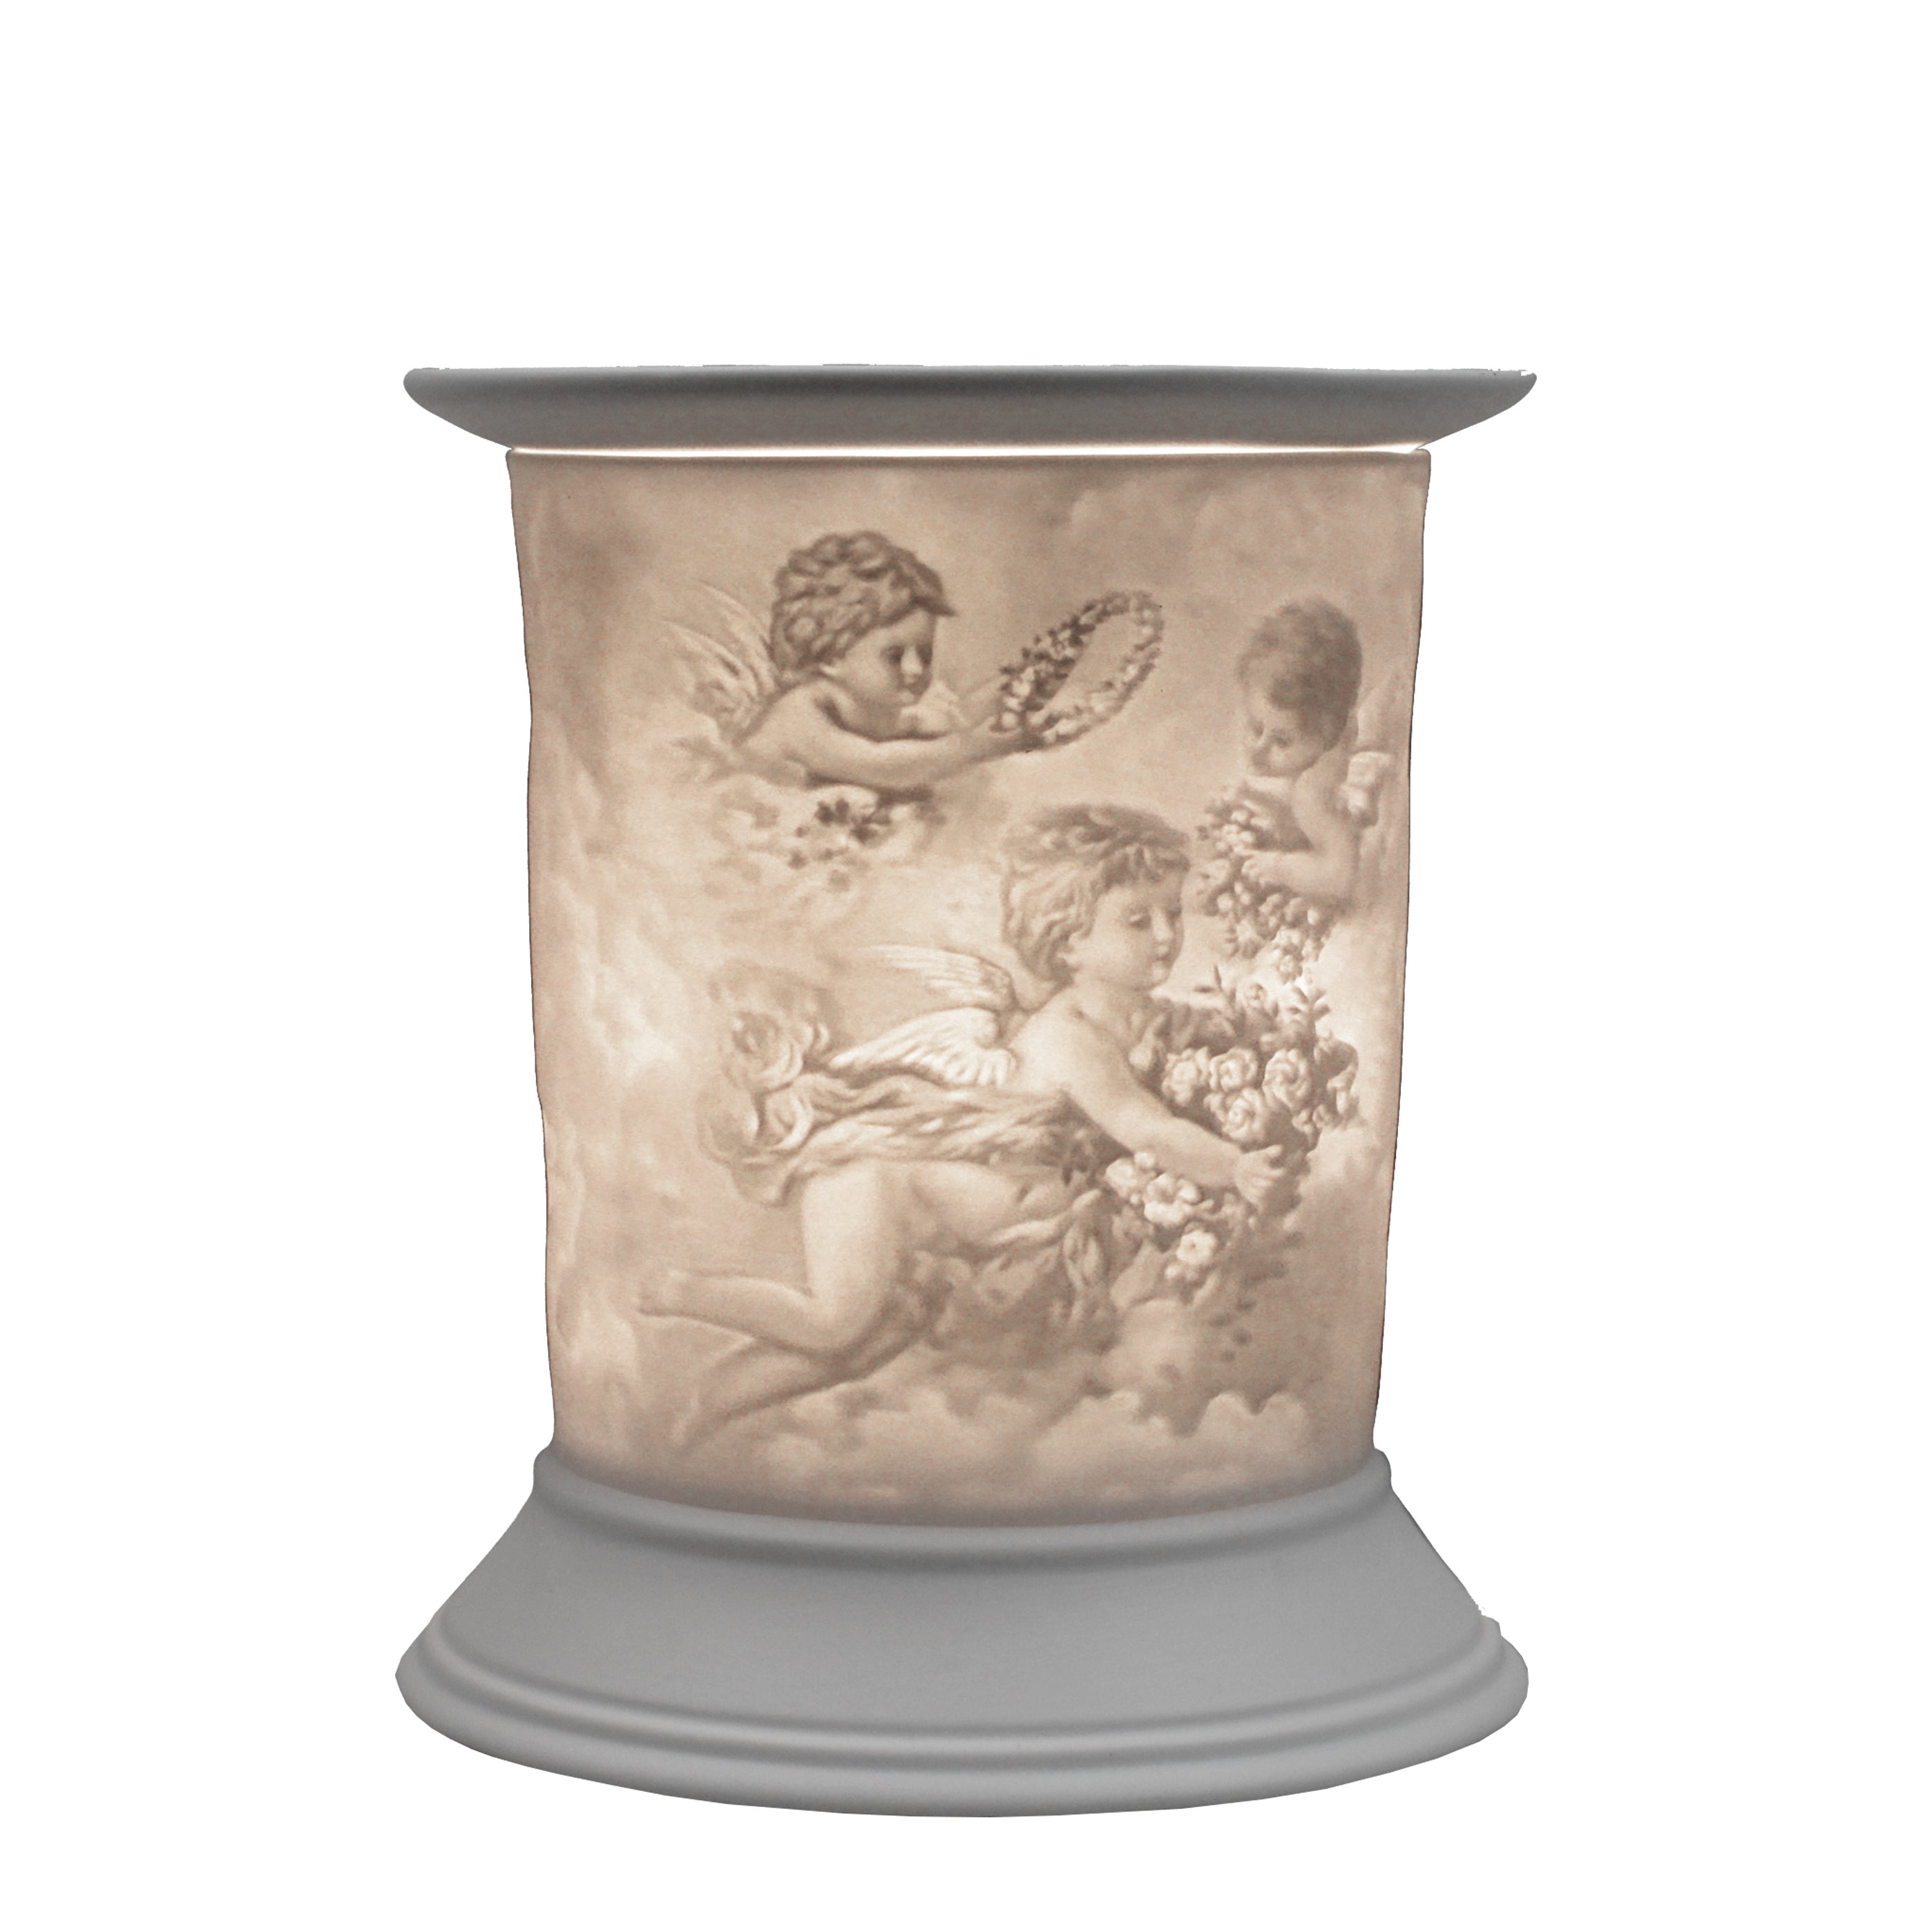 The porcelain material on this Wax Melt Burner allows bright light to shine through it, providing the opportunity to create this gorgeous Cherub design. This is done by crafting images out of thicker and thinner sections of the porcelain, allowing for detailed shadowing and a 3D effect. The porcelains elegant look will fit perfectly in any room is available in a range of designs and two different shapes.